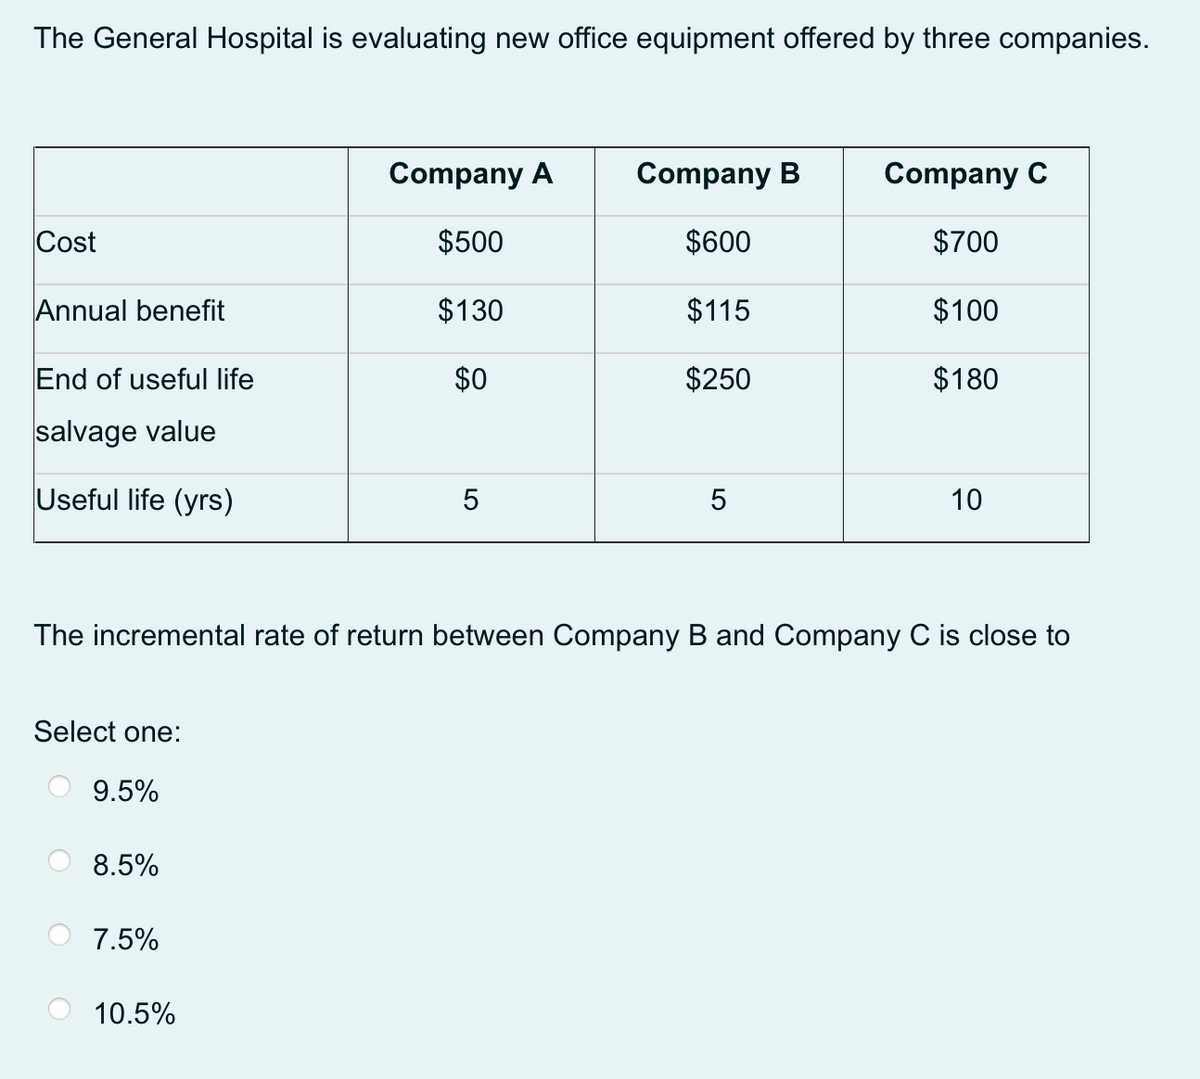 The General Hospital is evaluating new office equipment offered by three companies.
Cost
Annual benefit
End of useful life
salvage value
Useful life (yrs)
Select one:
9.5%
8.5%
7.5%
Company A
$500
$130
$0
10.5%
5
The incremental rate of return between Company B and Company C is close to
Company B
$600
$115
$250
5
Company C
$700
$100
$180
10